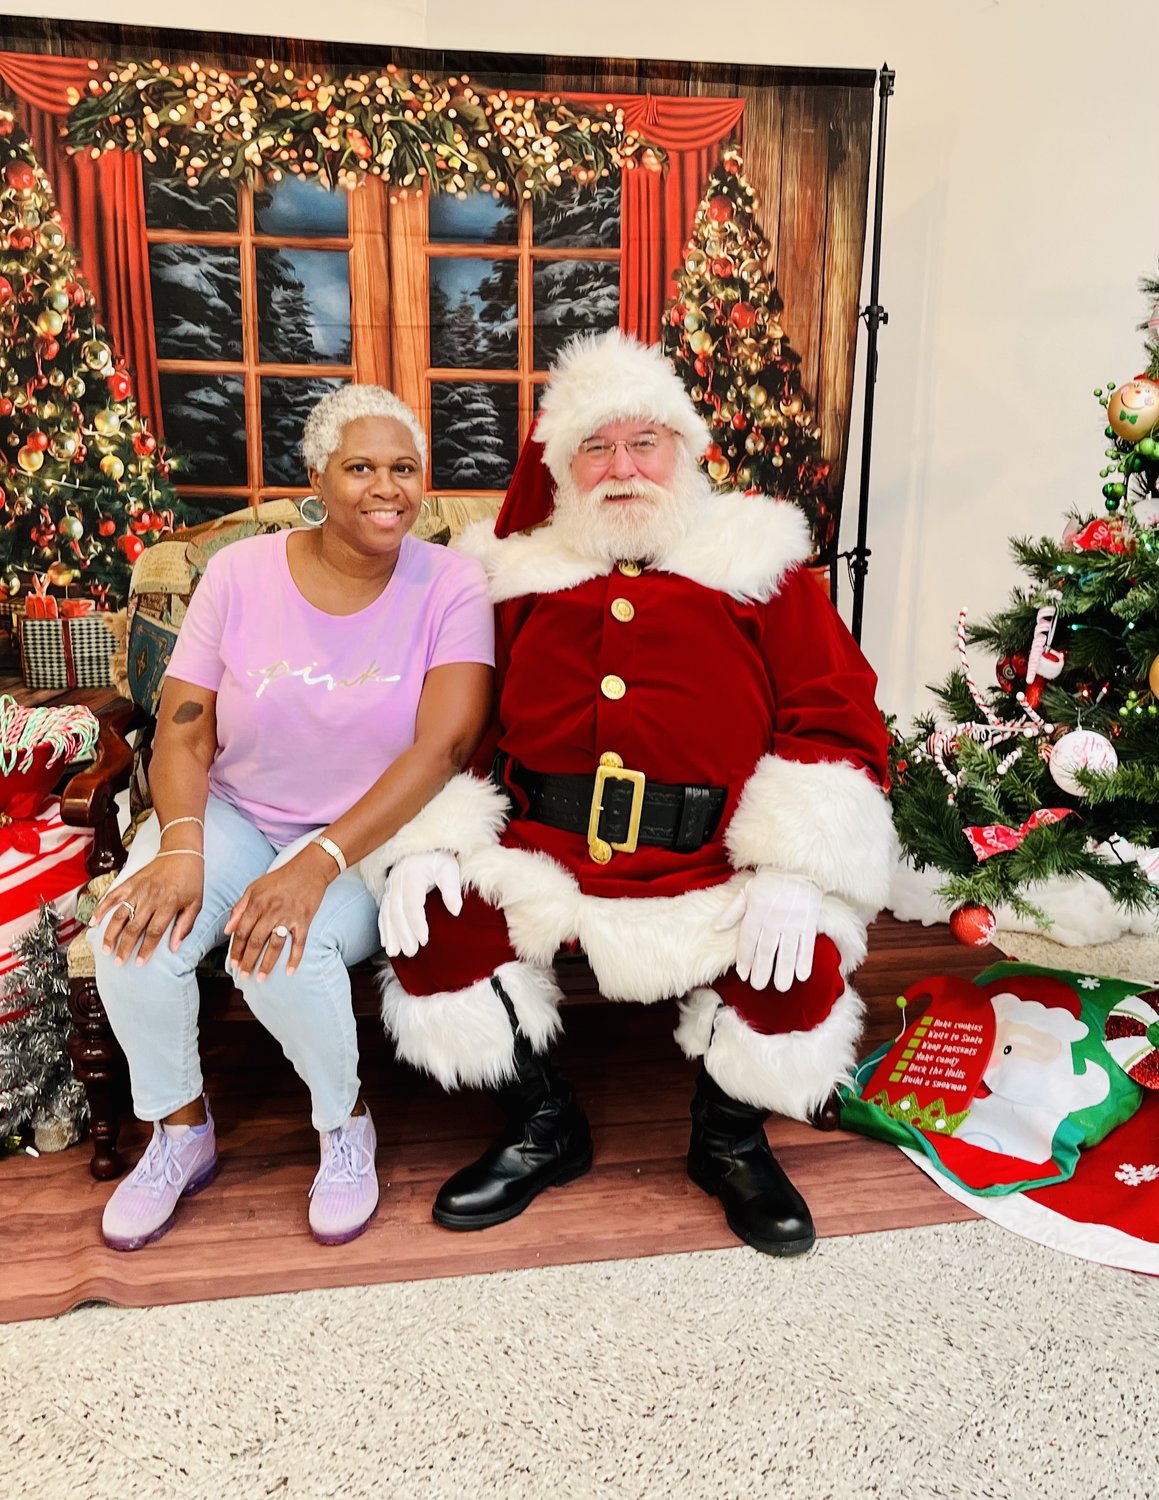 Brookshire celebrated its Christmas Festival Dec. 3. The festival featured a performance by the Earl Sanders Jr. Band and a visit from Santa Claus, who is pictured here visiting with Sherrel Rogers.